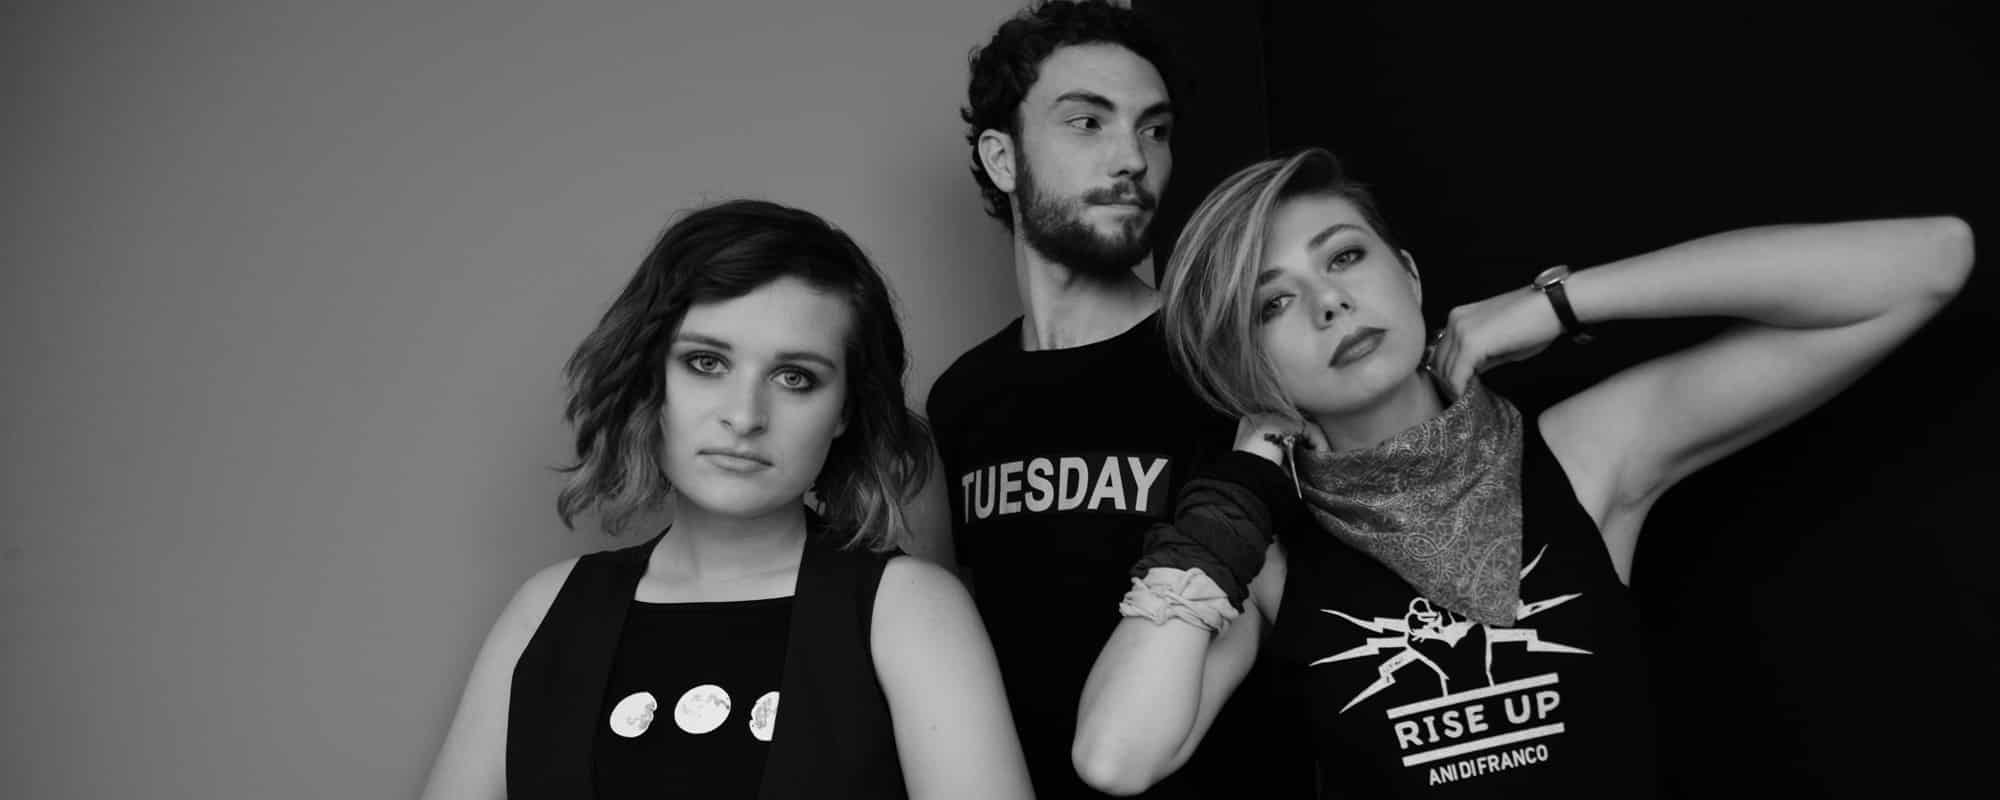 The Accidentals Mourn Loss in 2020, Look Forward to the Future with “Wildfire”